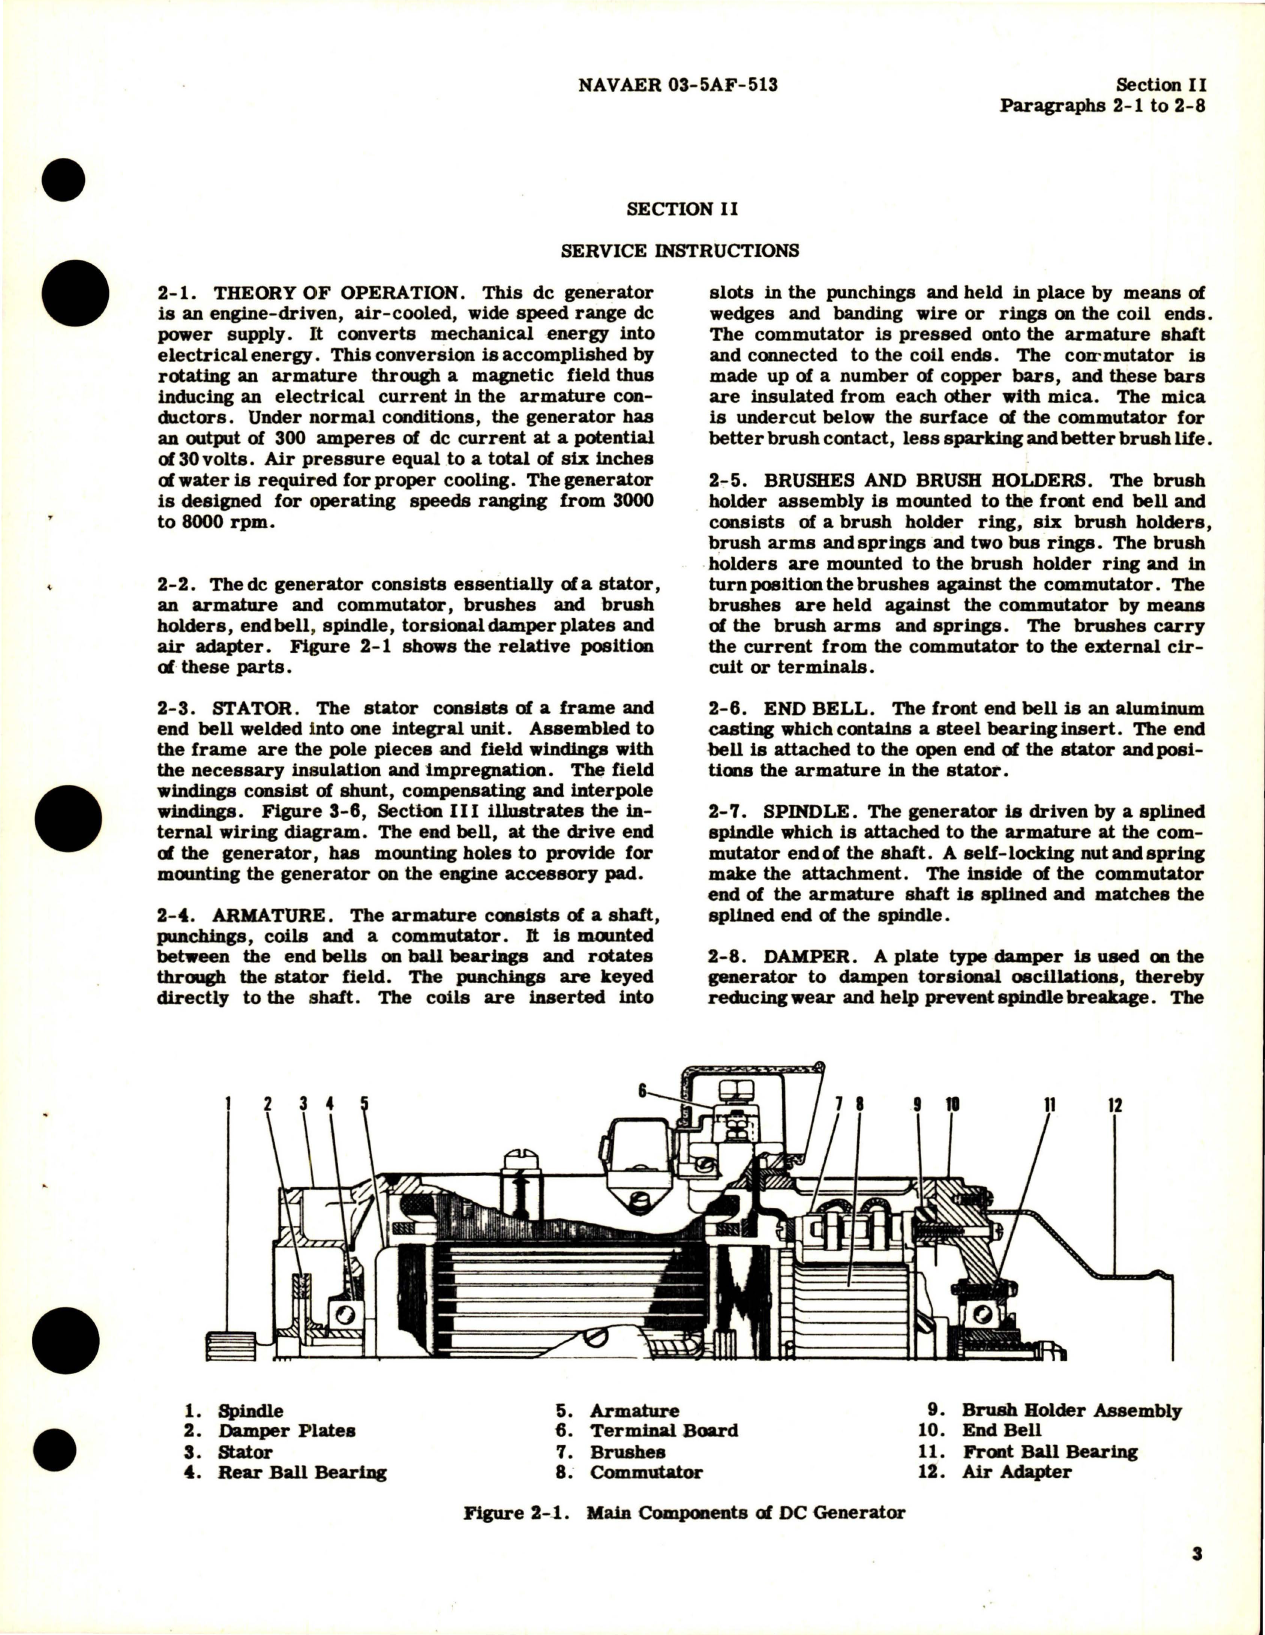 Sample page 5 from AirCorps Library document: Operation, Service and Overhaul Instructions for DC Generator - Part 903J790-2